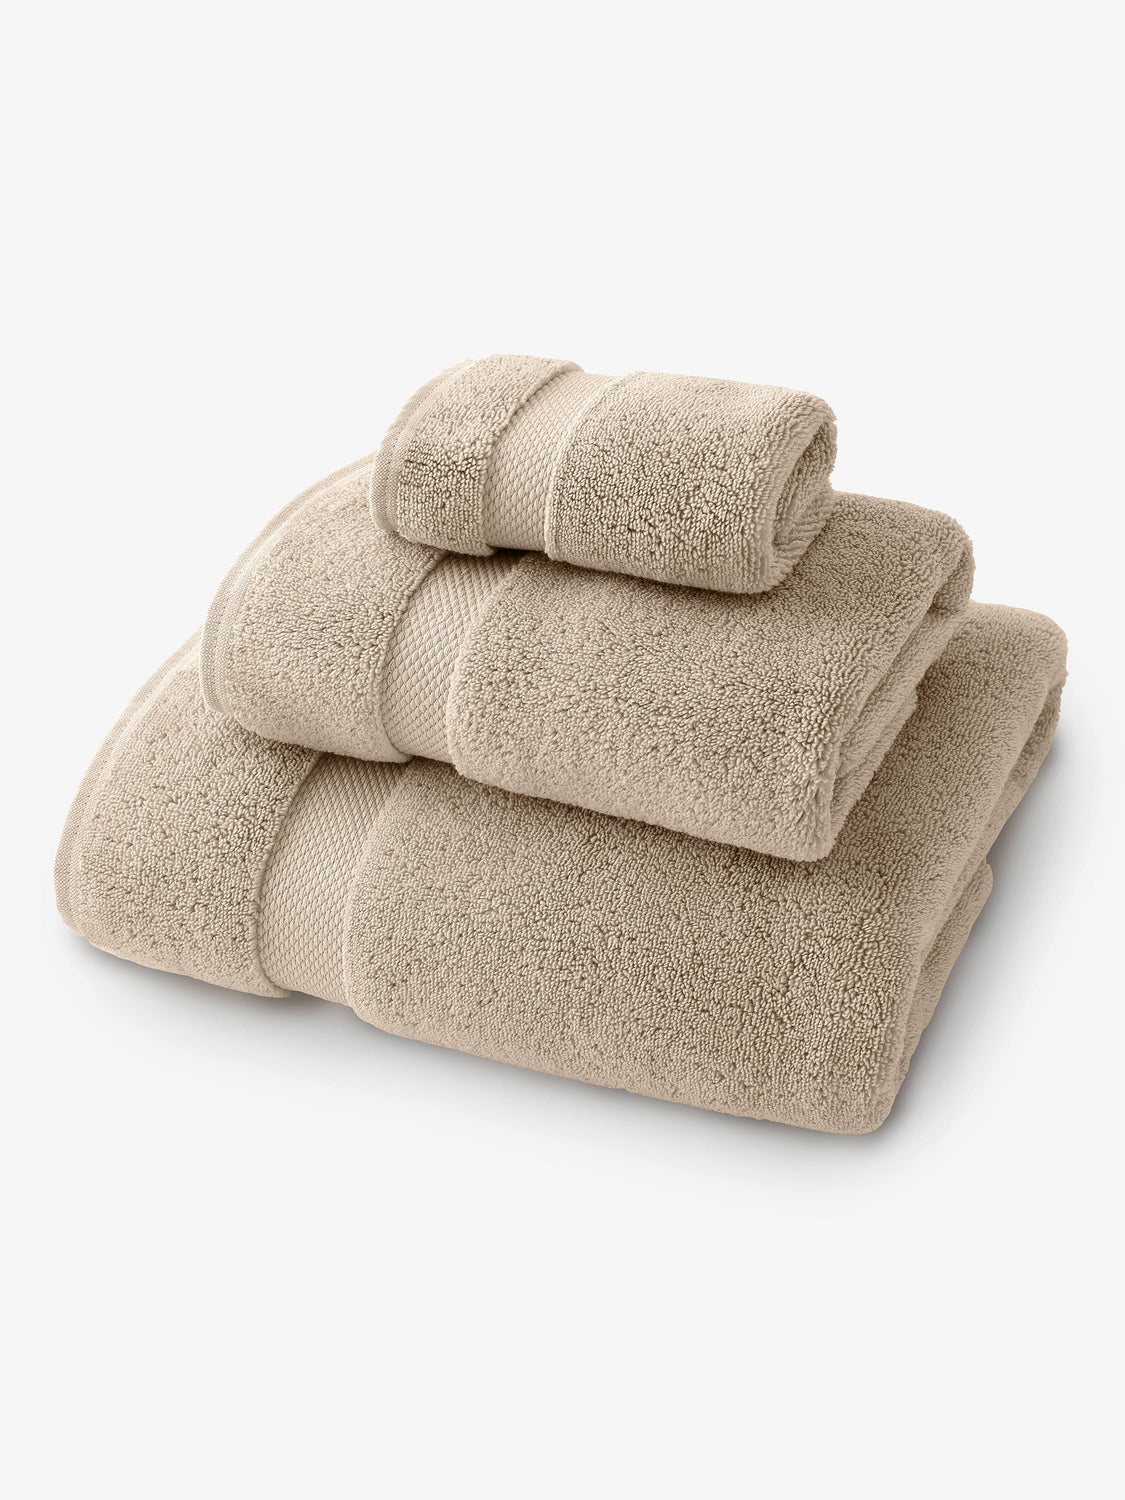 A set of tan bath, hand, and wash towels folded and stacked on one another.